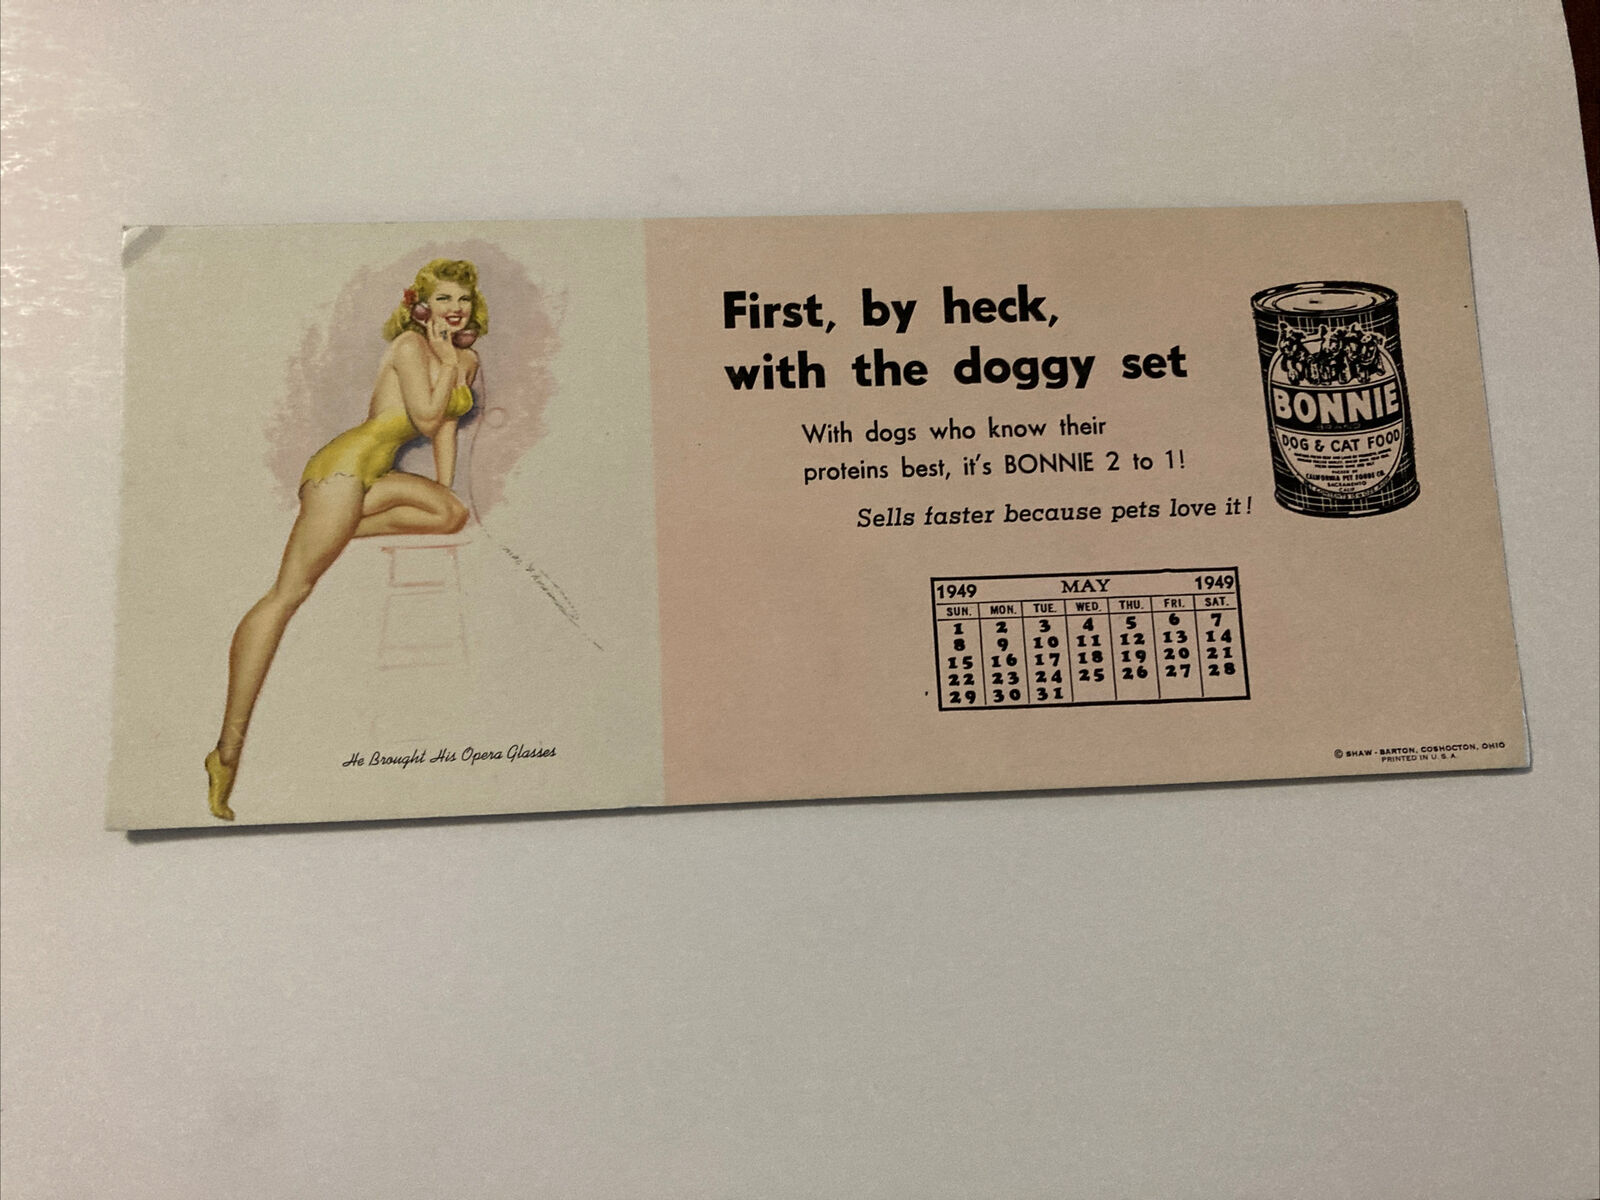 Vintage pinup blotter “He Brought His Opera Glasses” Bonnie Dog Food May 1949